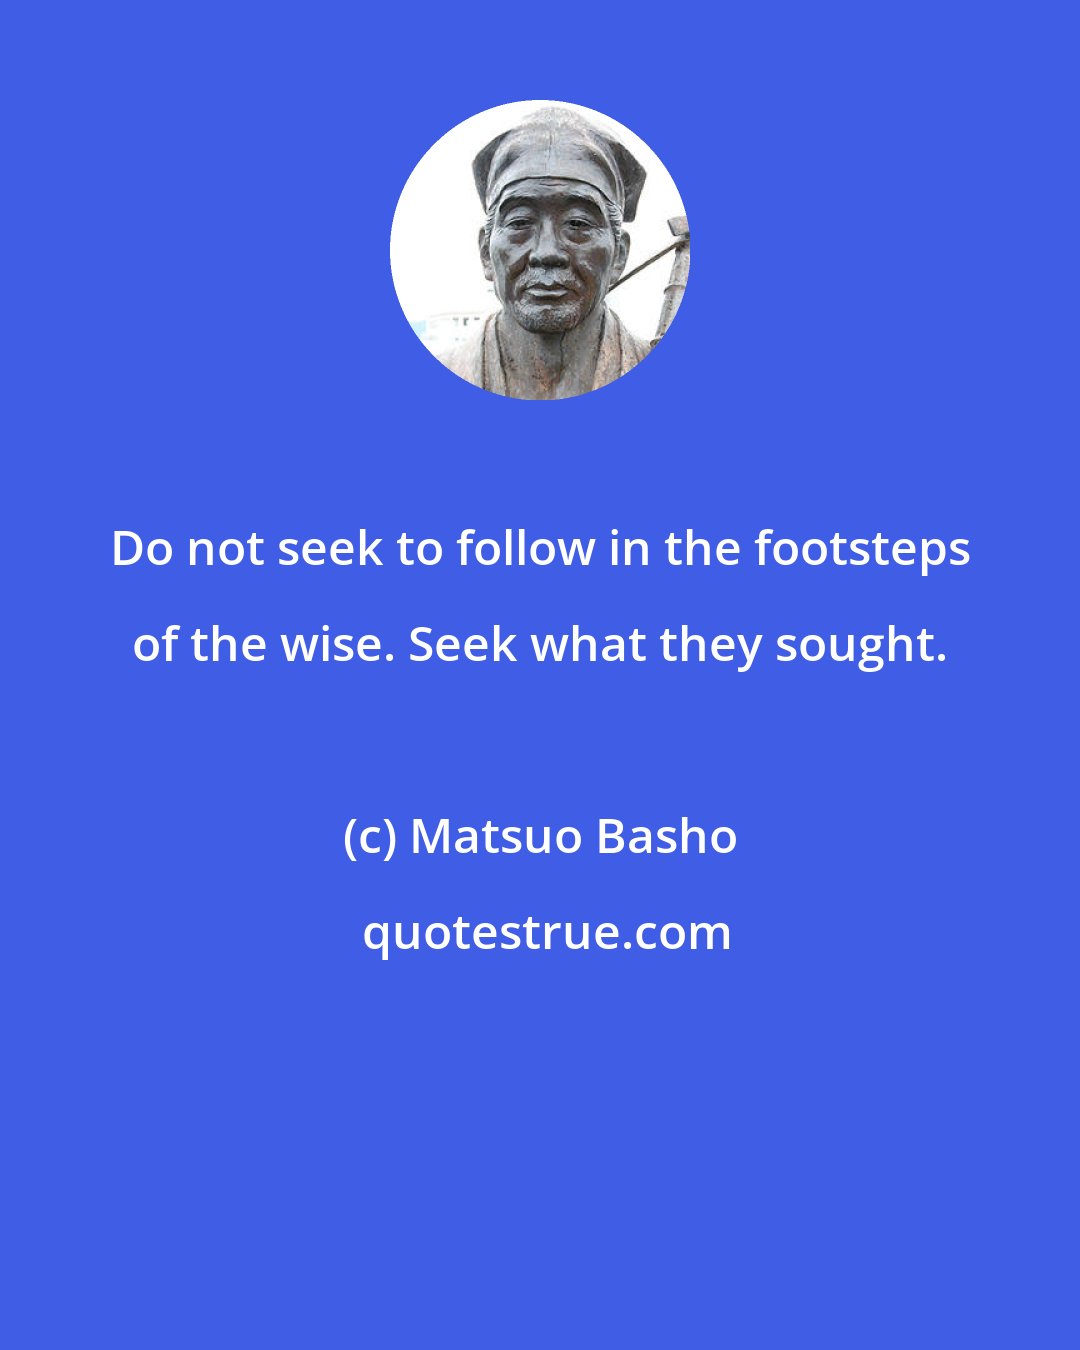 Matsuo Basho: Do not seek to follow in the footsteps of the wise. Seek what they sought.